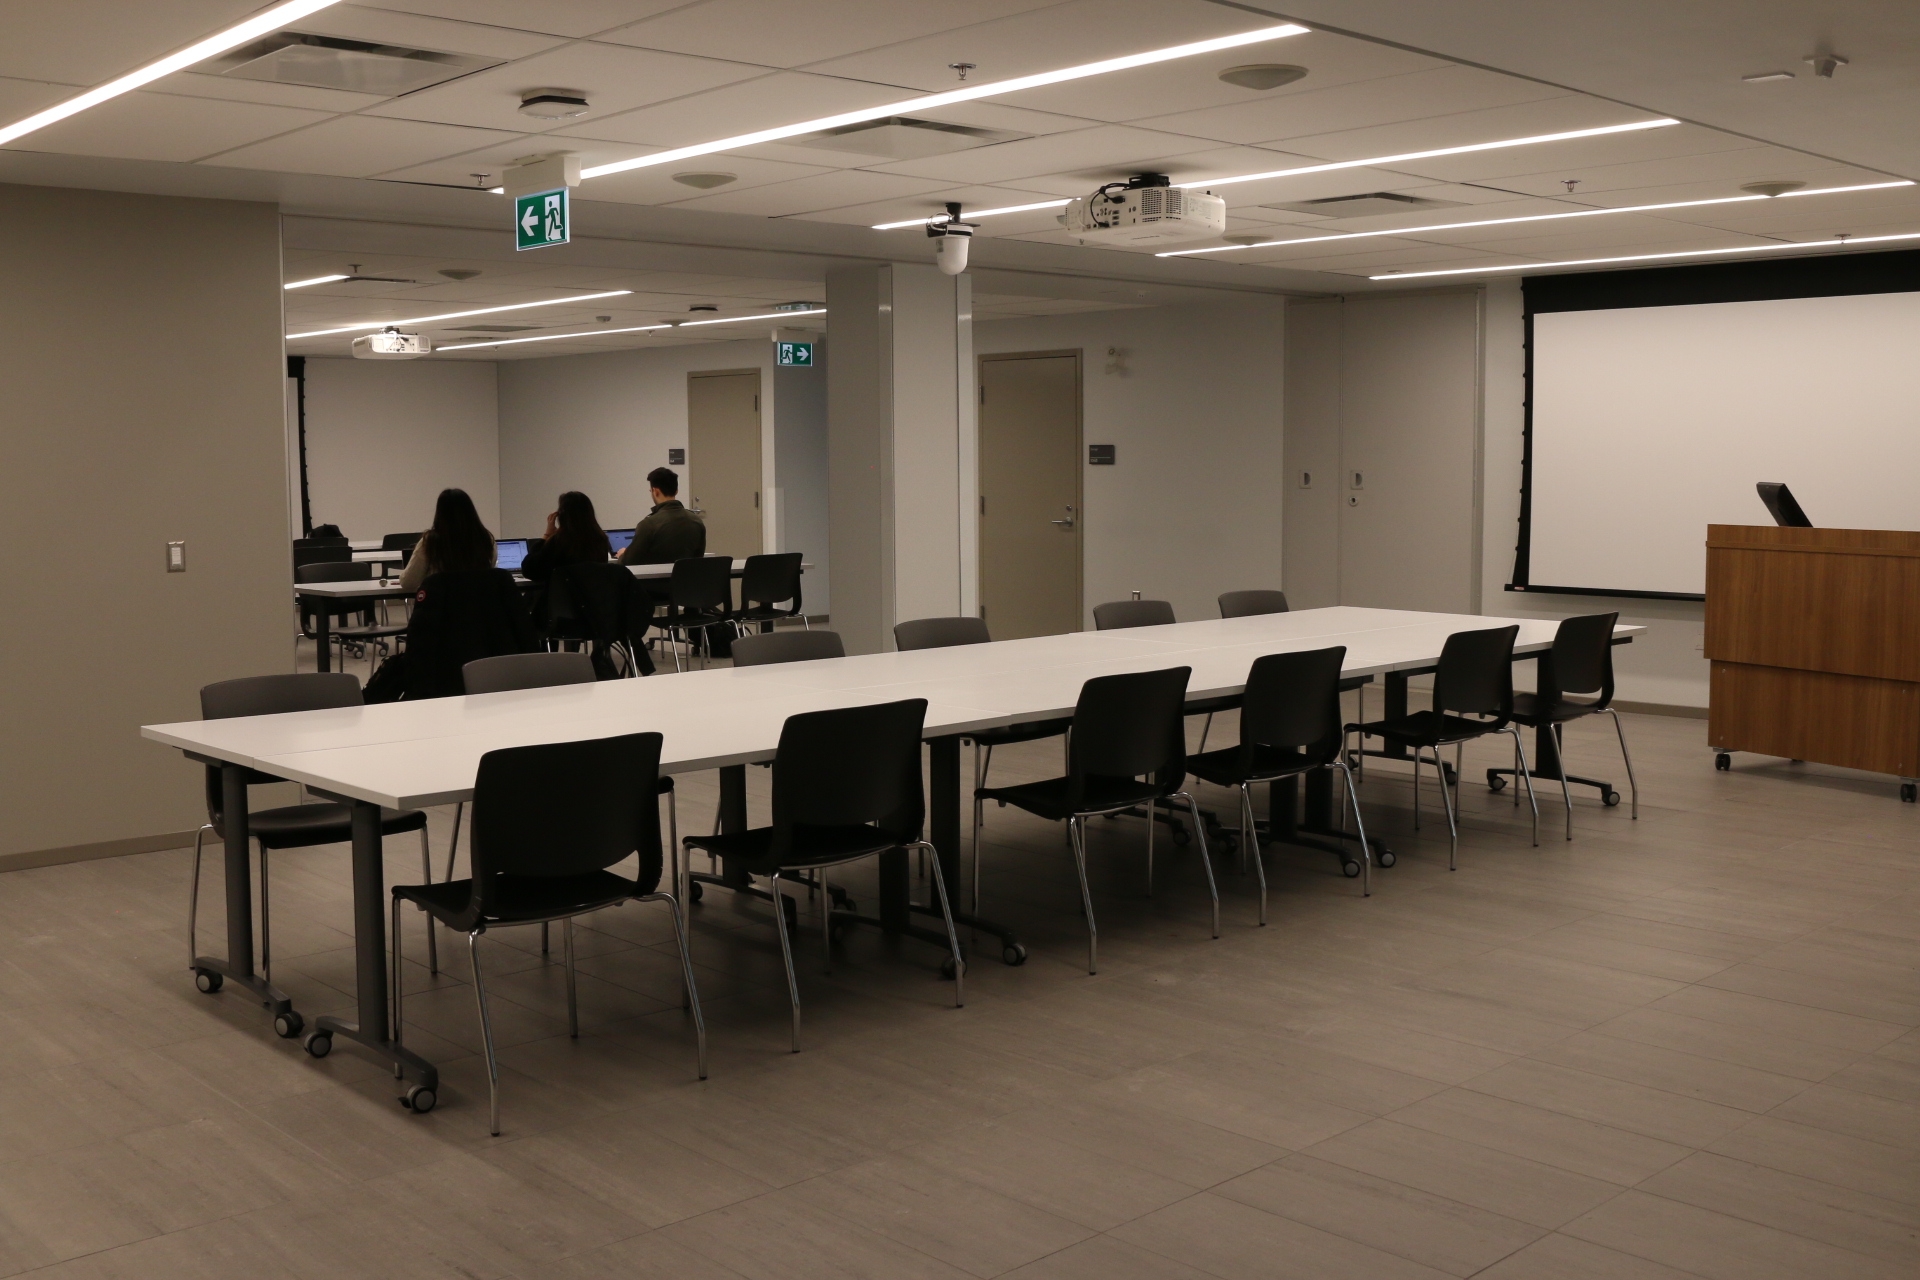 The LinQLab space with tables, chairs, and a projector screen.